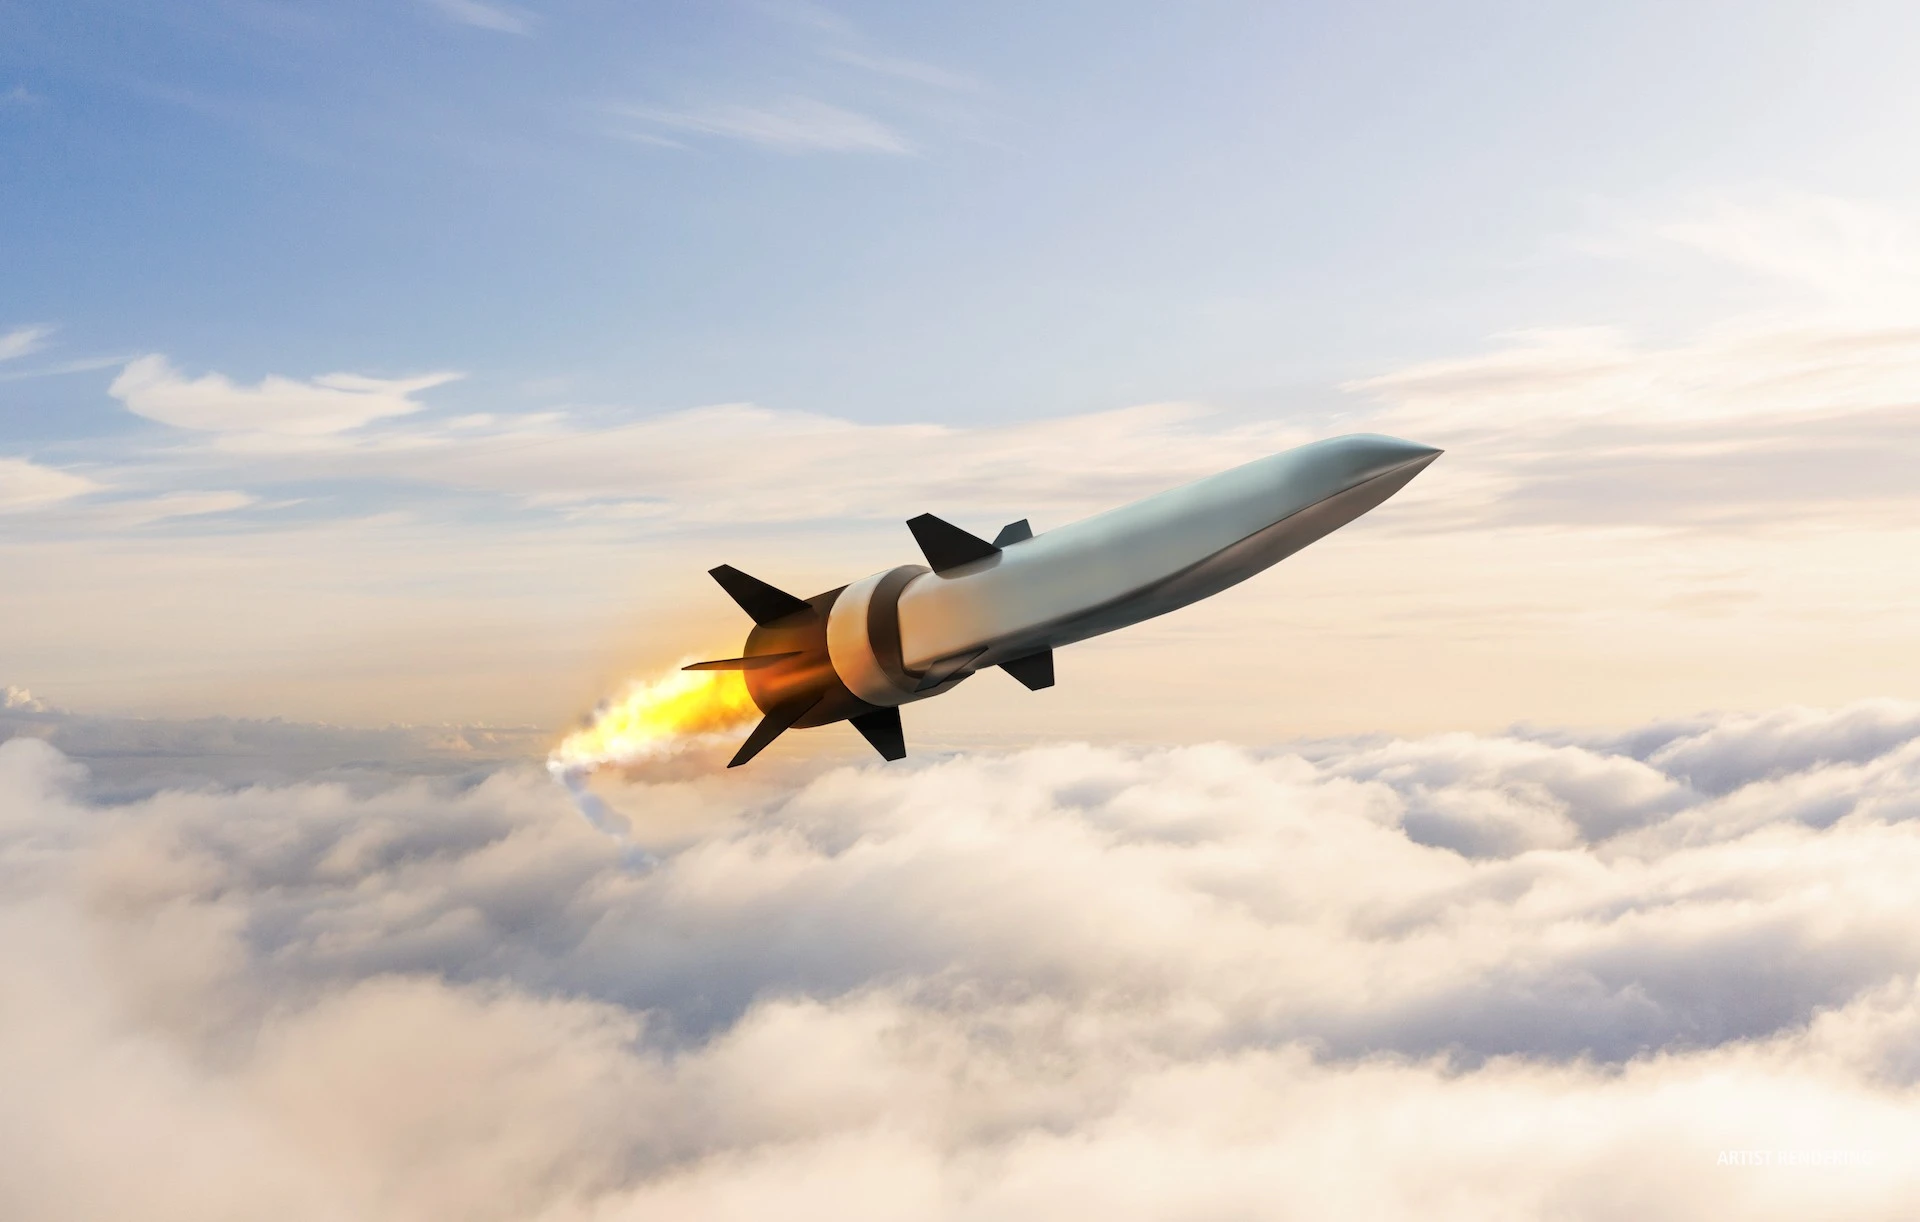 The US Air Force has demanded $384m to develop a hypersonic cruise missile, the HACM, which would surpass Russian and Chinese counterparts in launch range